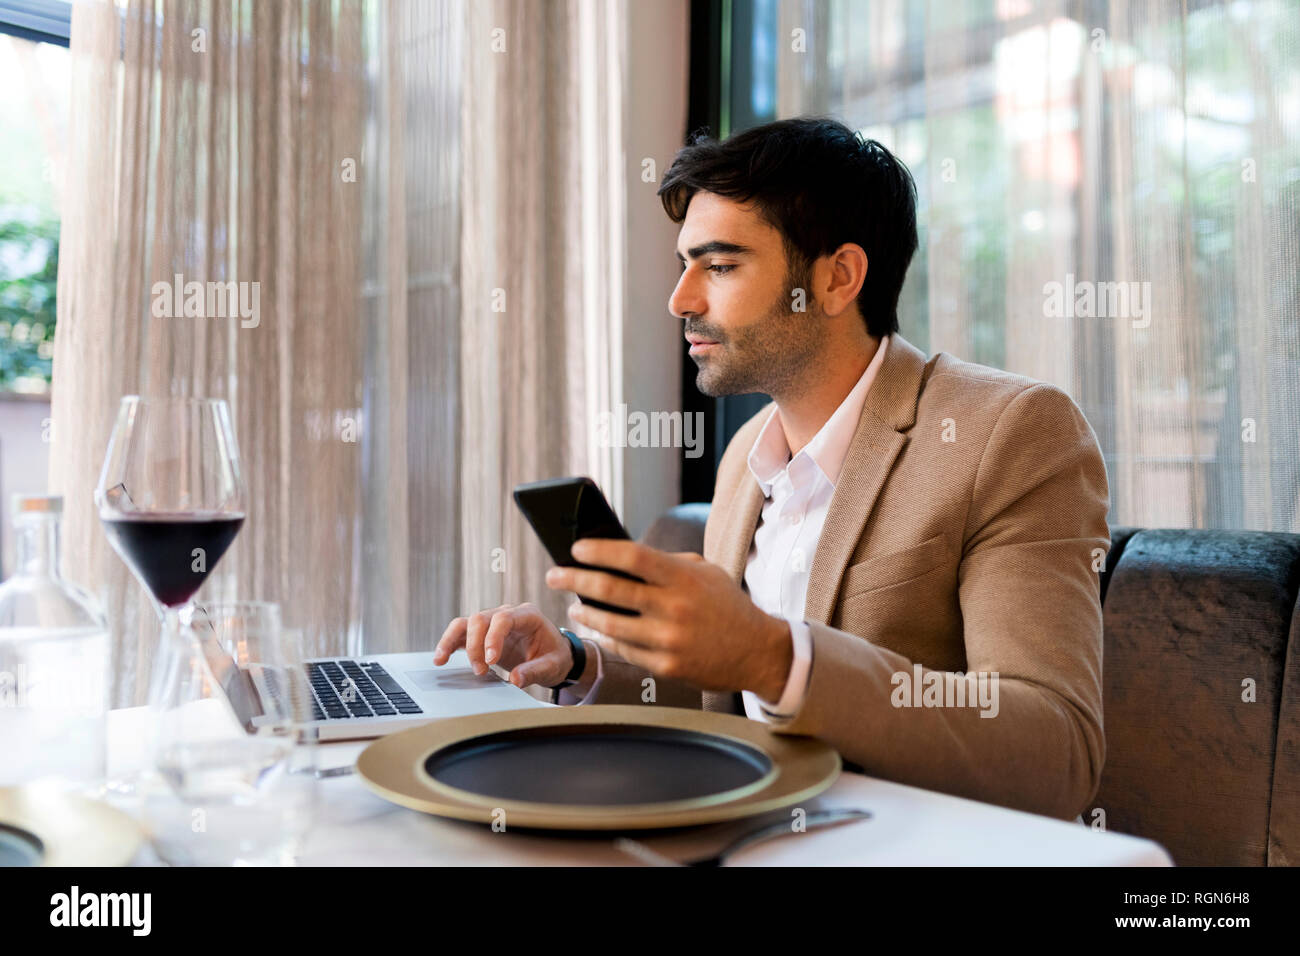 Man sitting at table in a restaurant using laptop and cell phone Stock Photo